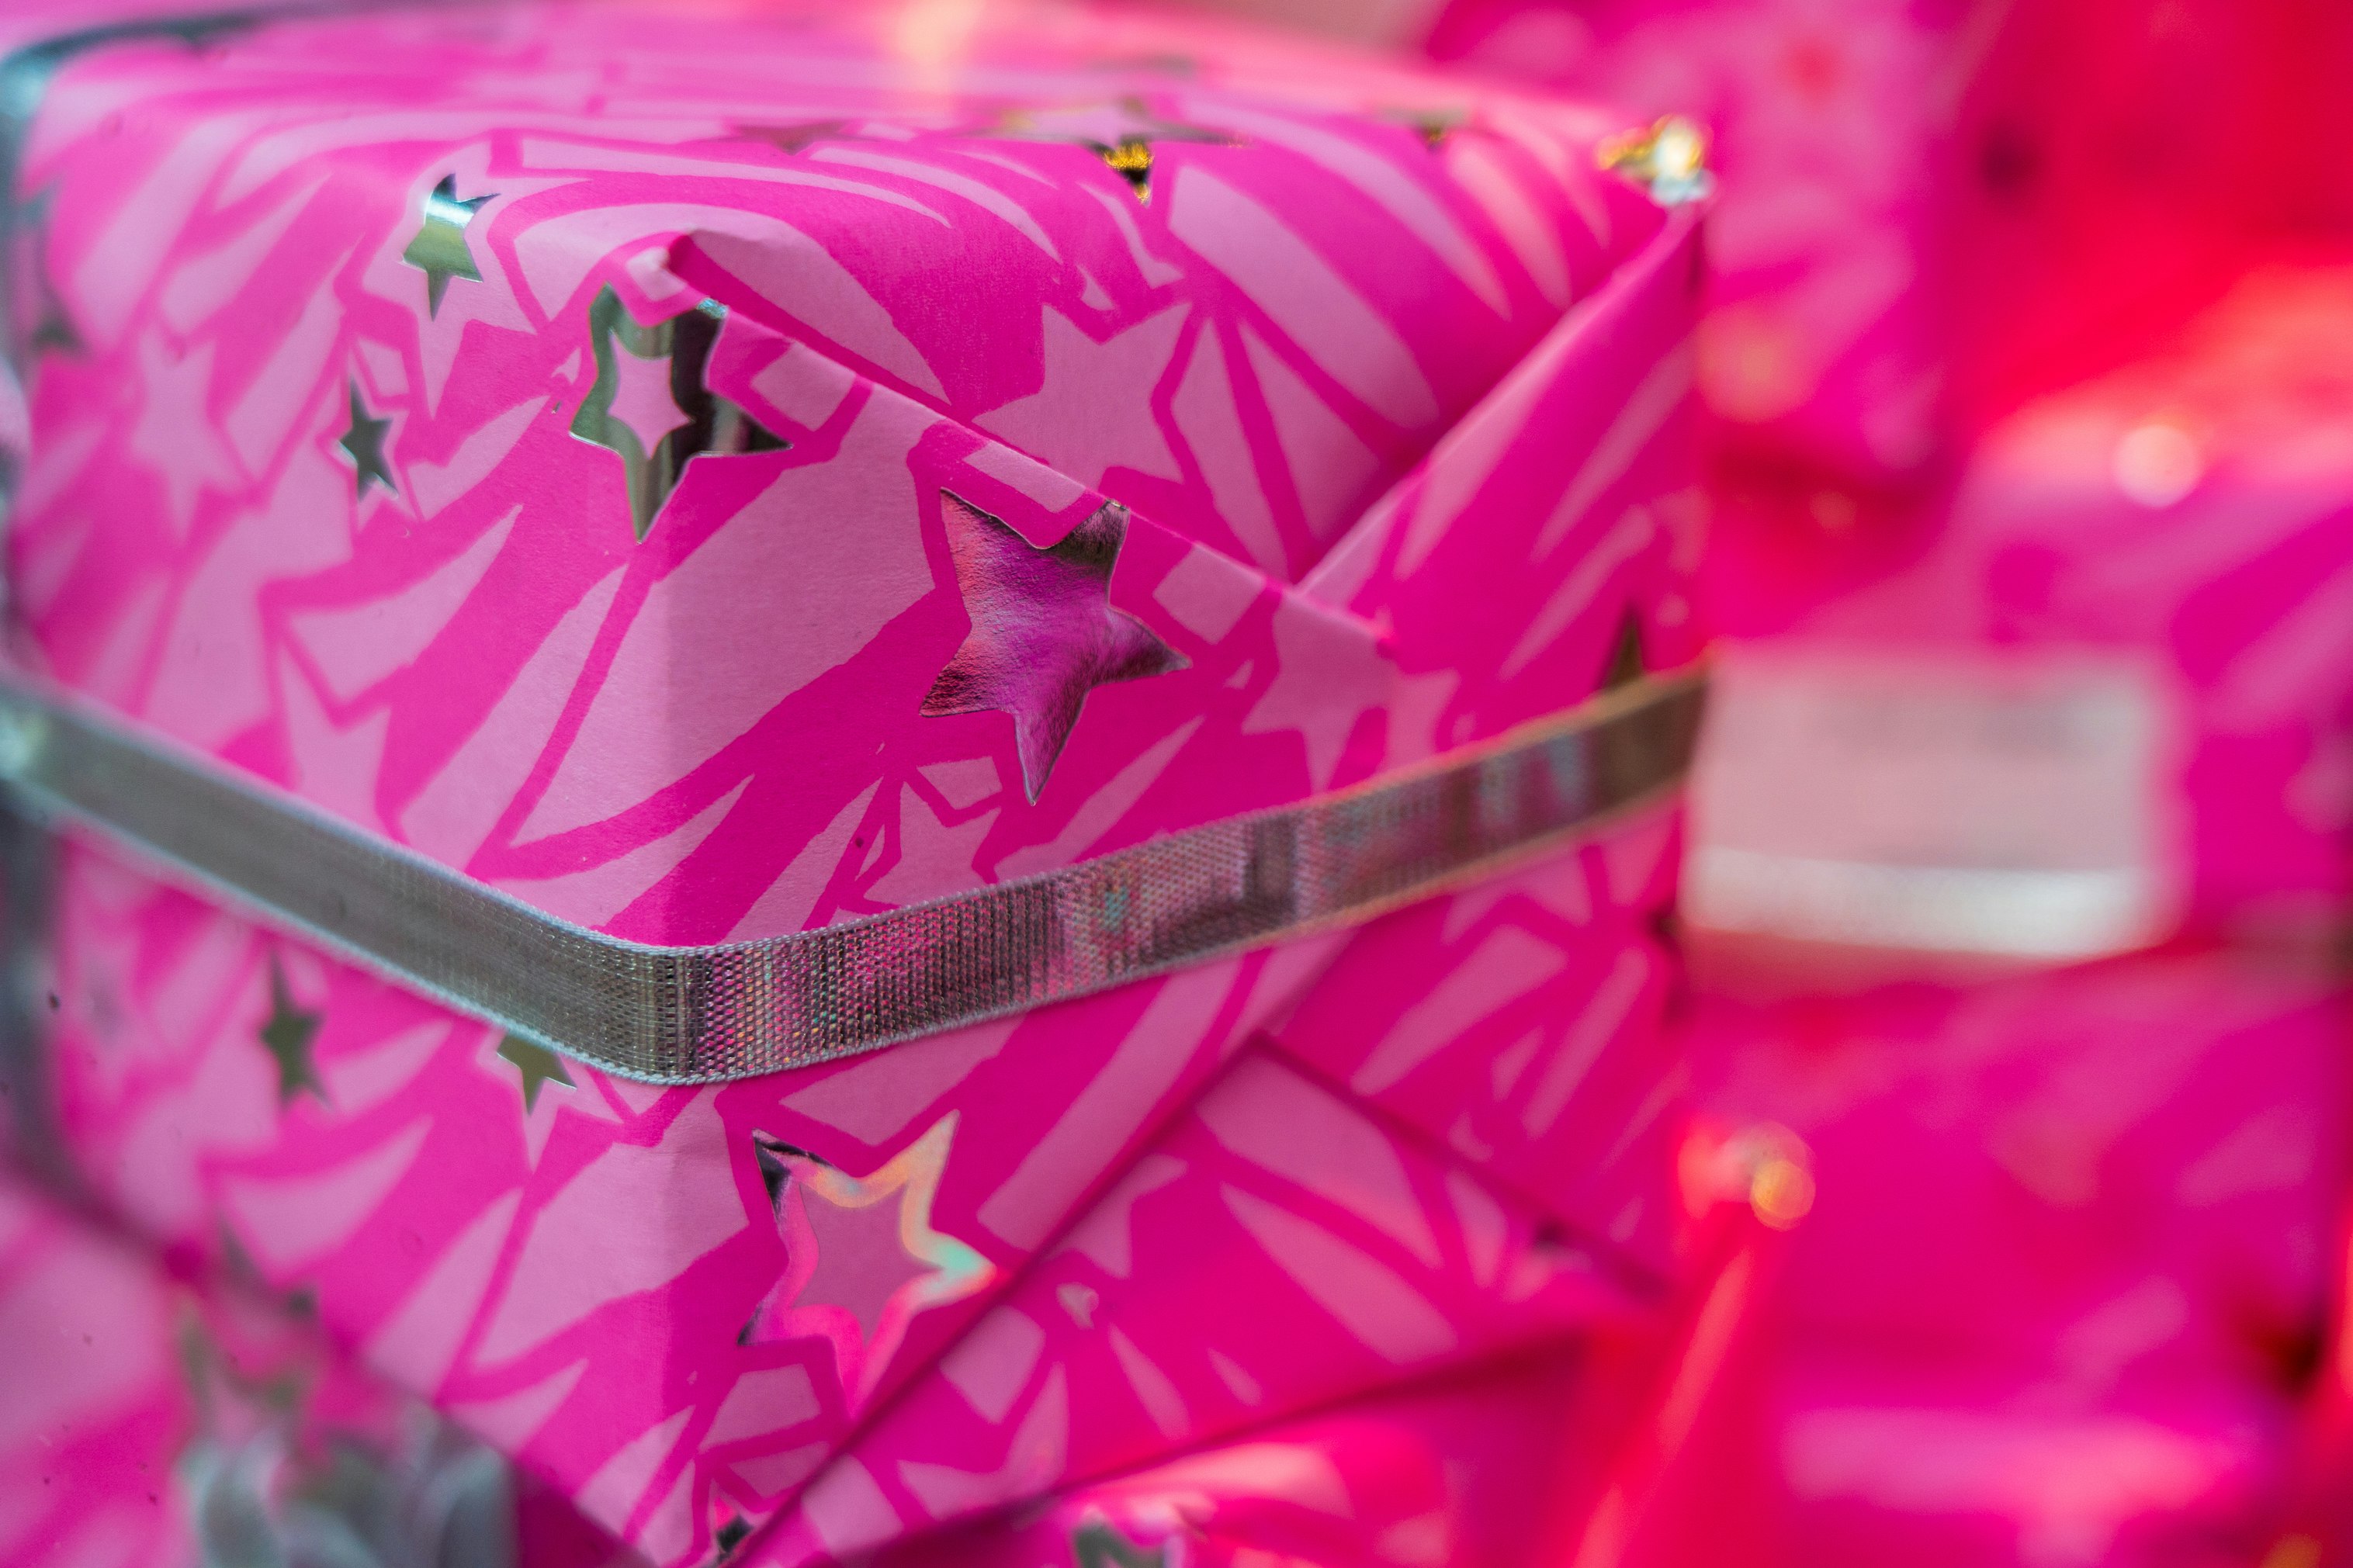 A gift wrapped in pink paper with silver starts and silver ribbon.